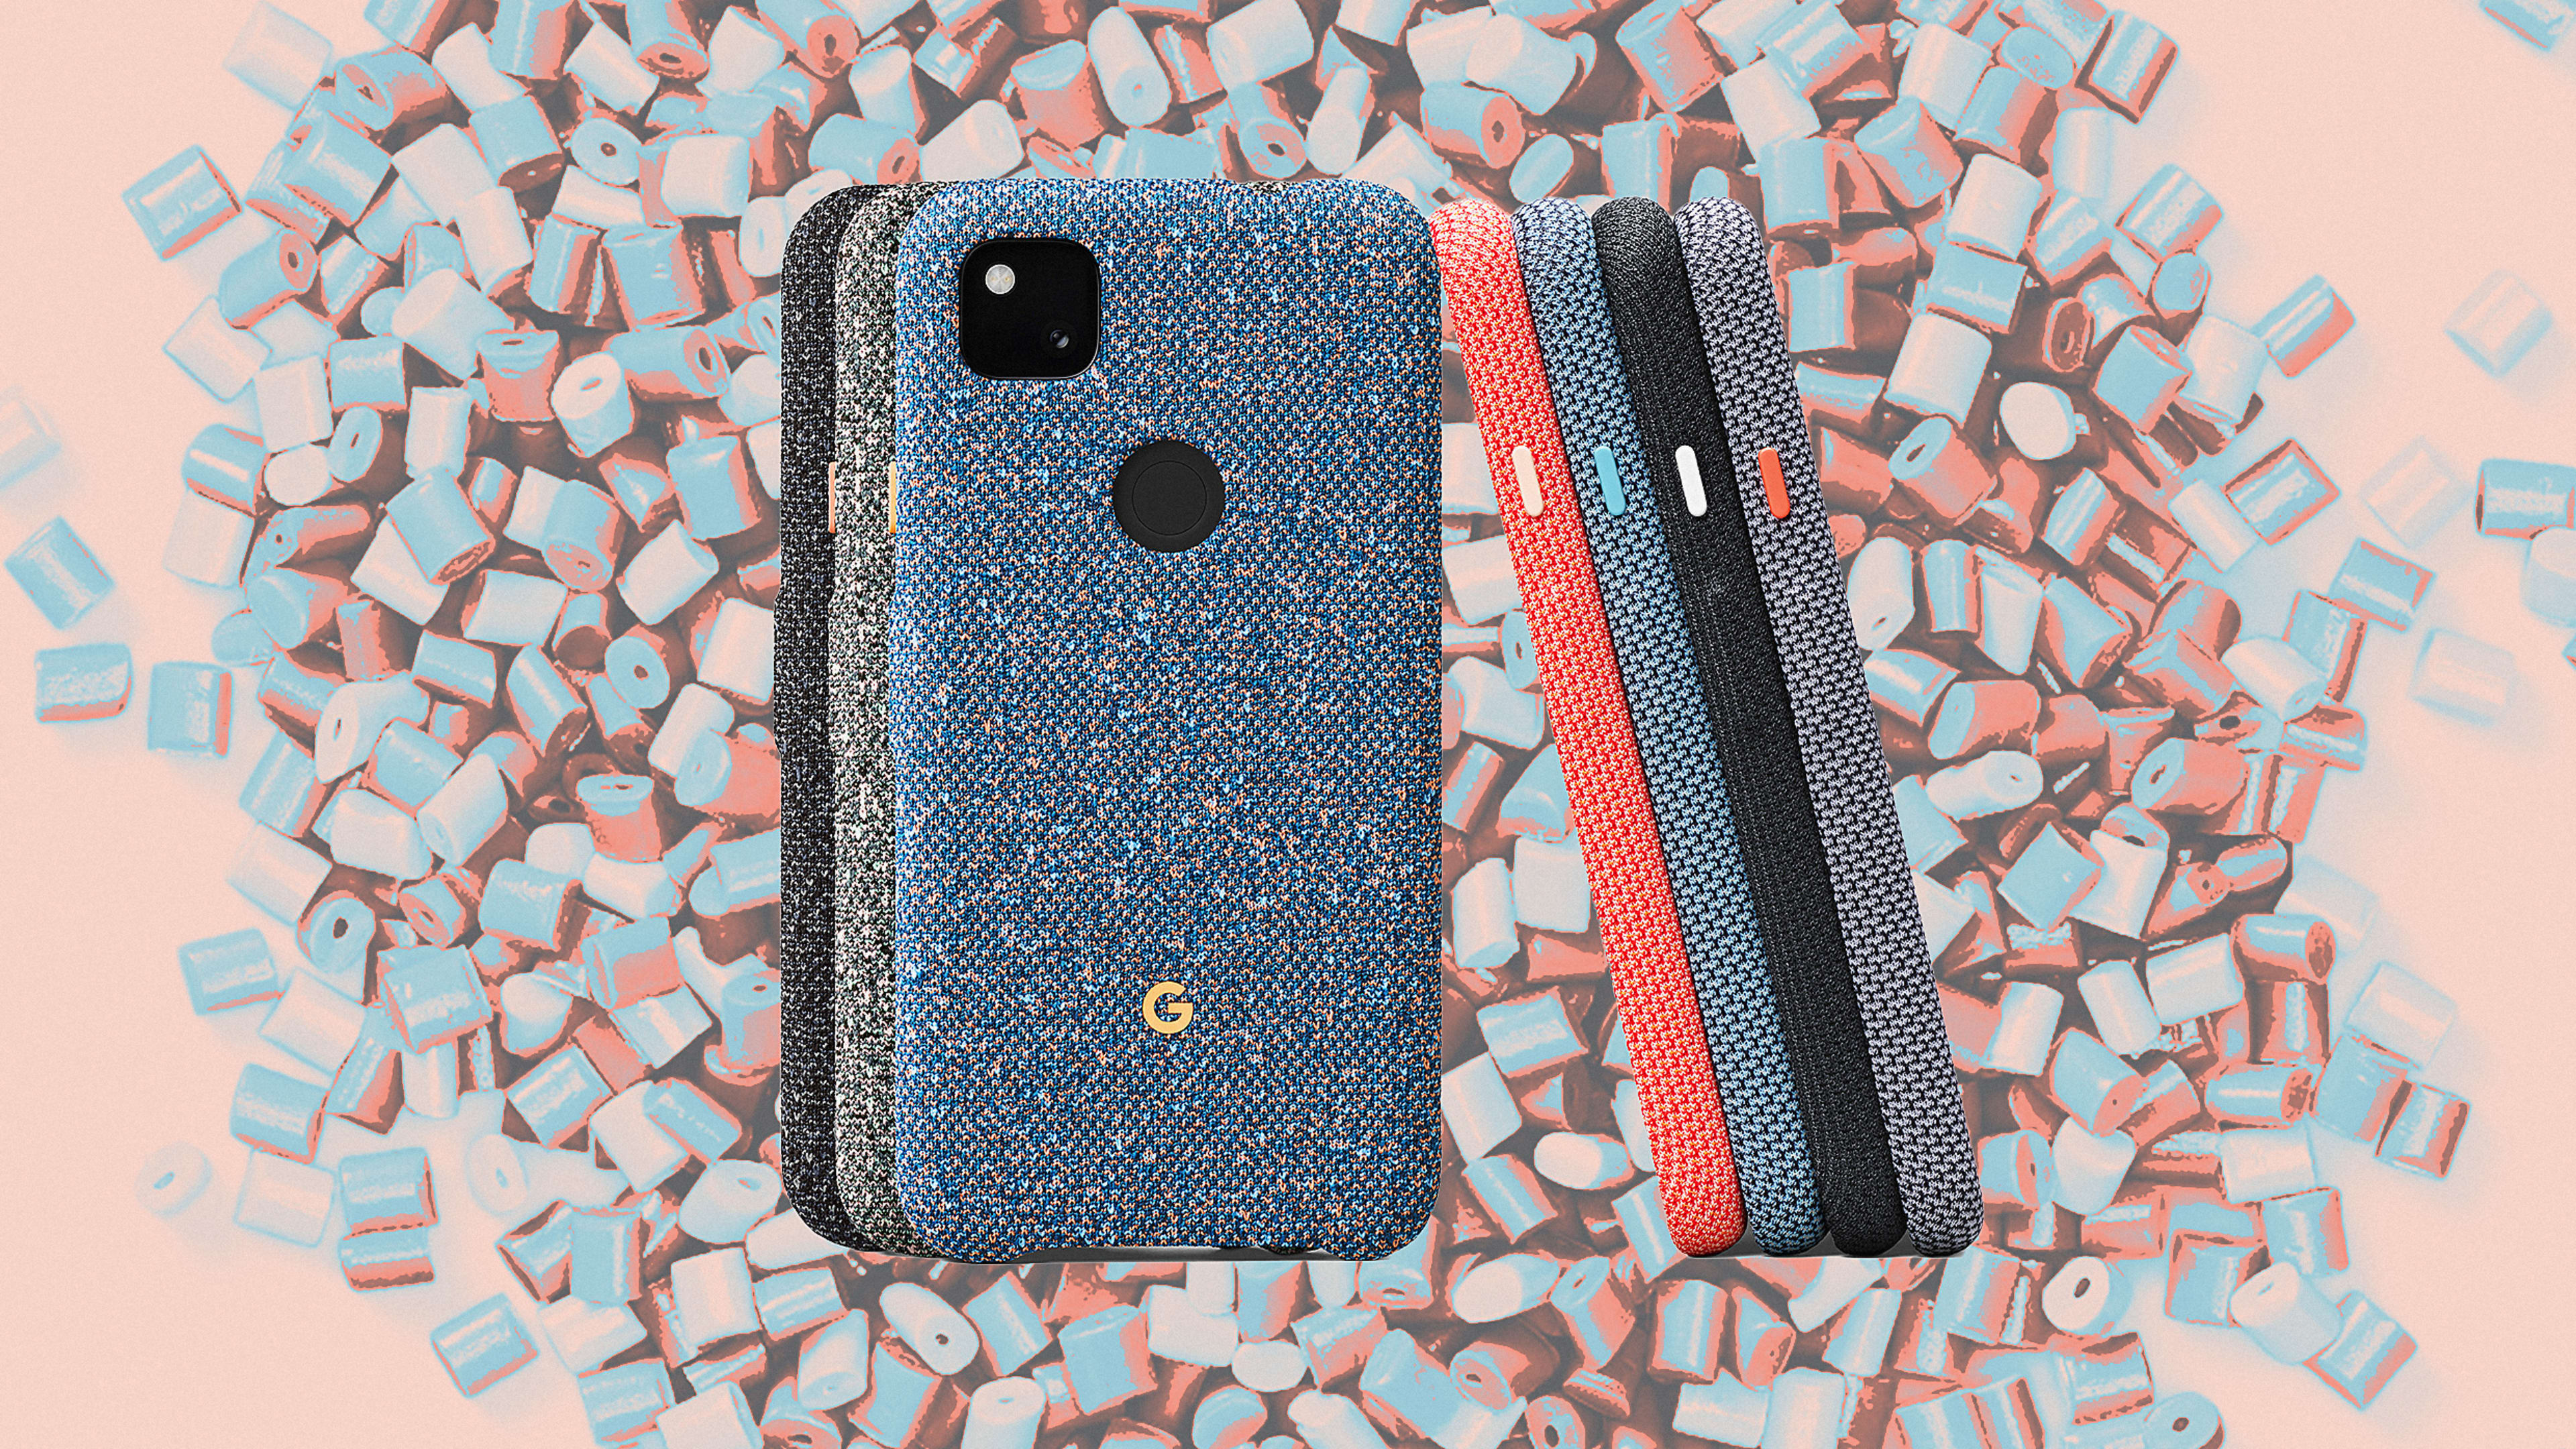 Google’s new phone case is beautiful—and it’s made out of water bottles